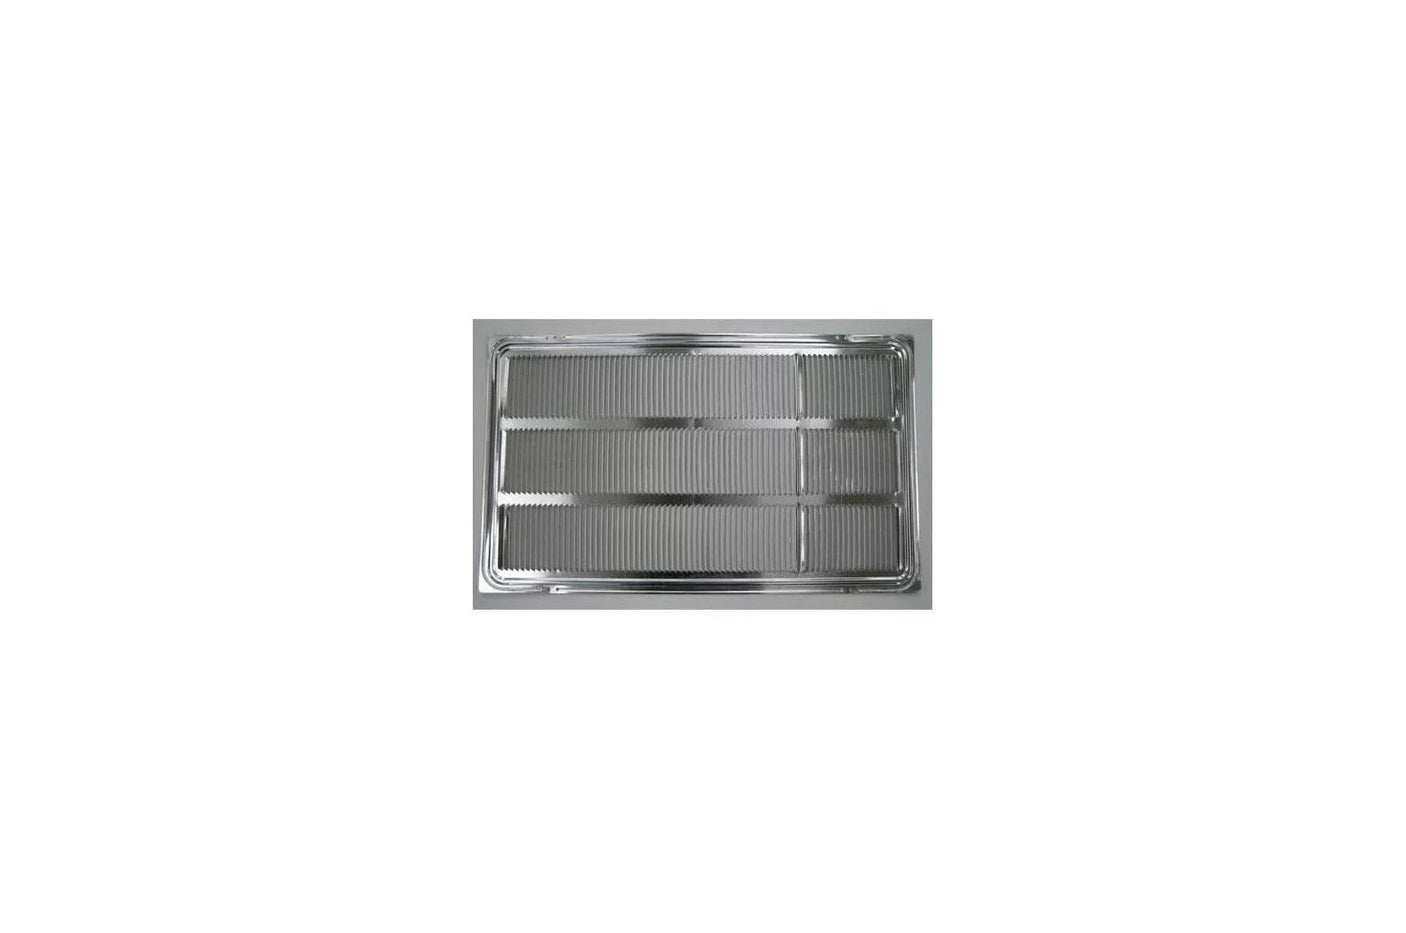 Thru-the-Wall Air Conditioner Architectural Grille